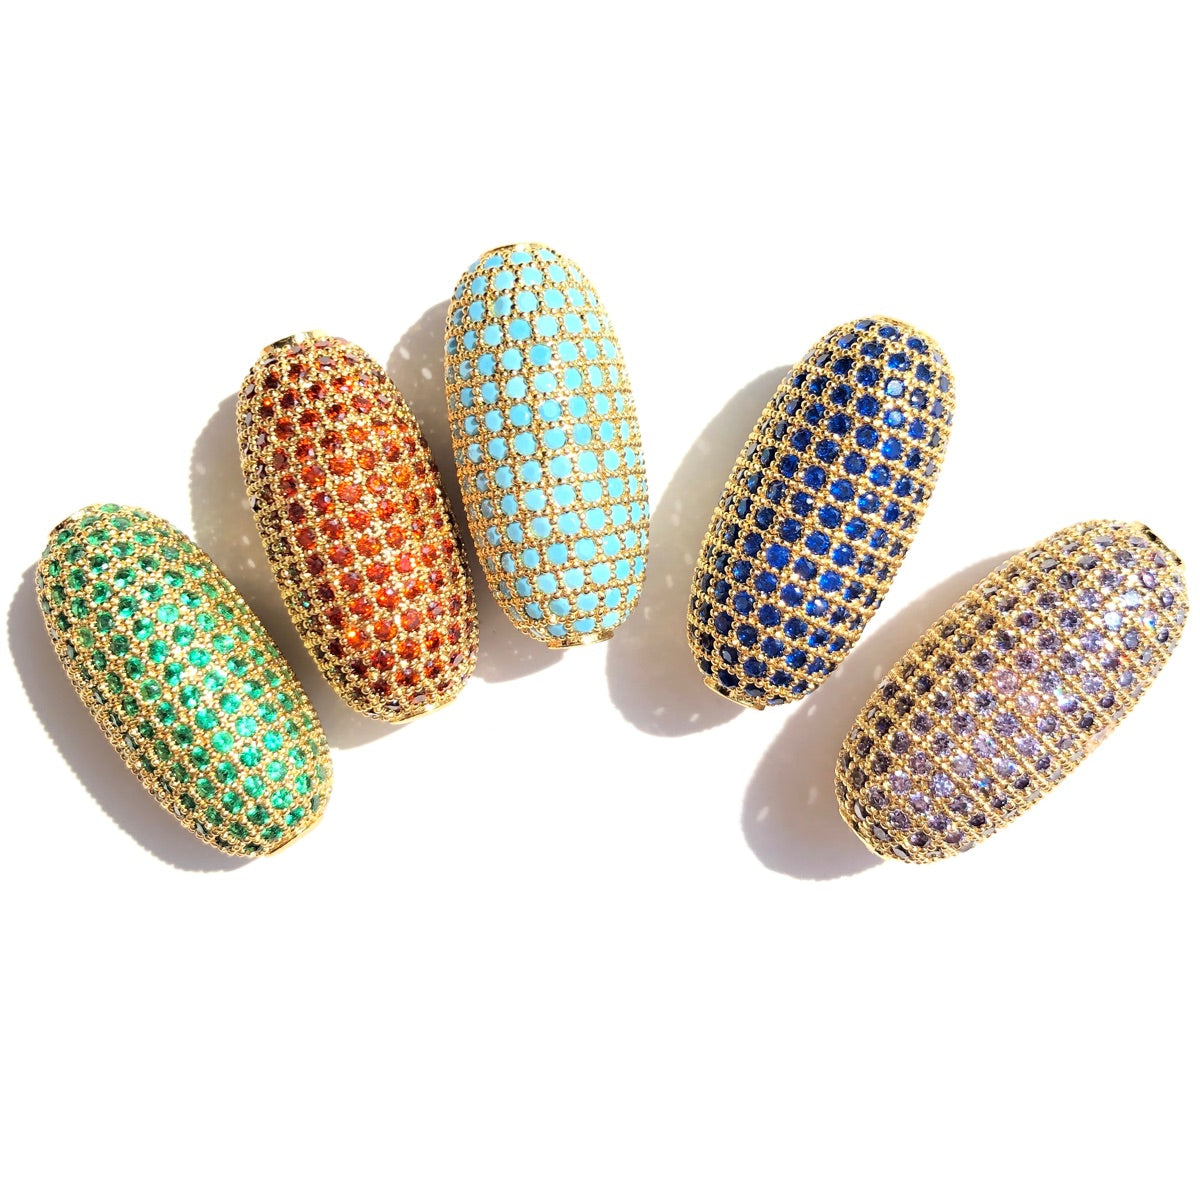 5-10pcs/lot Green Blue Turquoise Purple Reddish Orange Multicolor CZ Paved Oval Beads Centerpiece Spacers CZ Paved Spacers Colorful Zirconia New Spacers Arrivals Oval Spacers Charms Beads Beyond